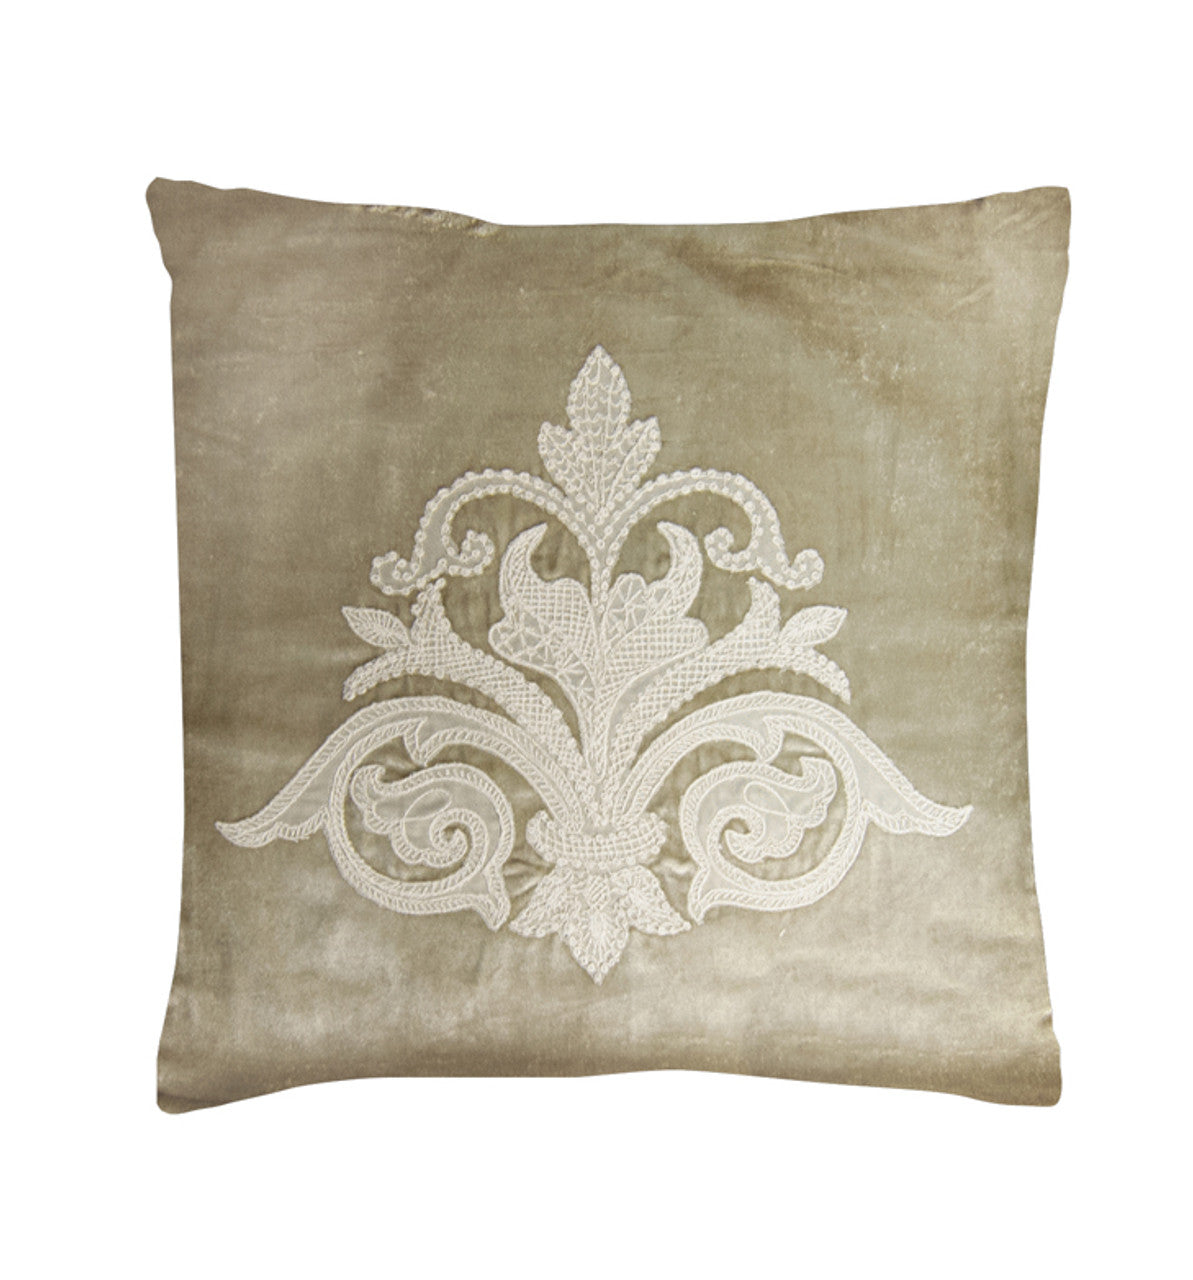 Downton Abbey Throw Pillow Collection by Heritage Lace